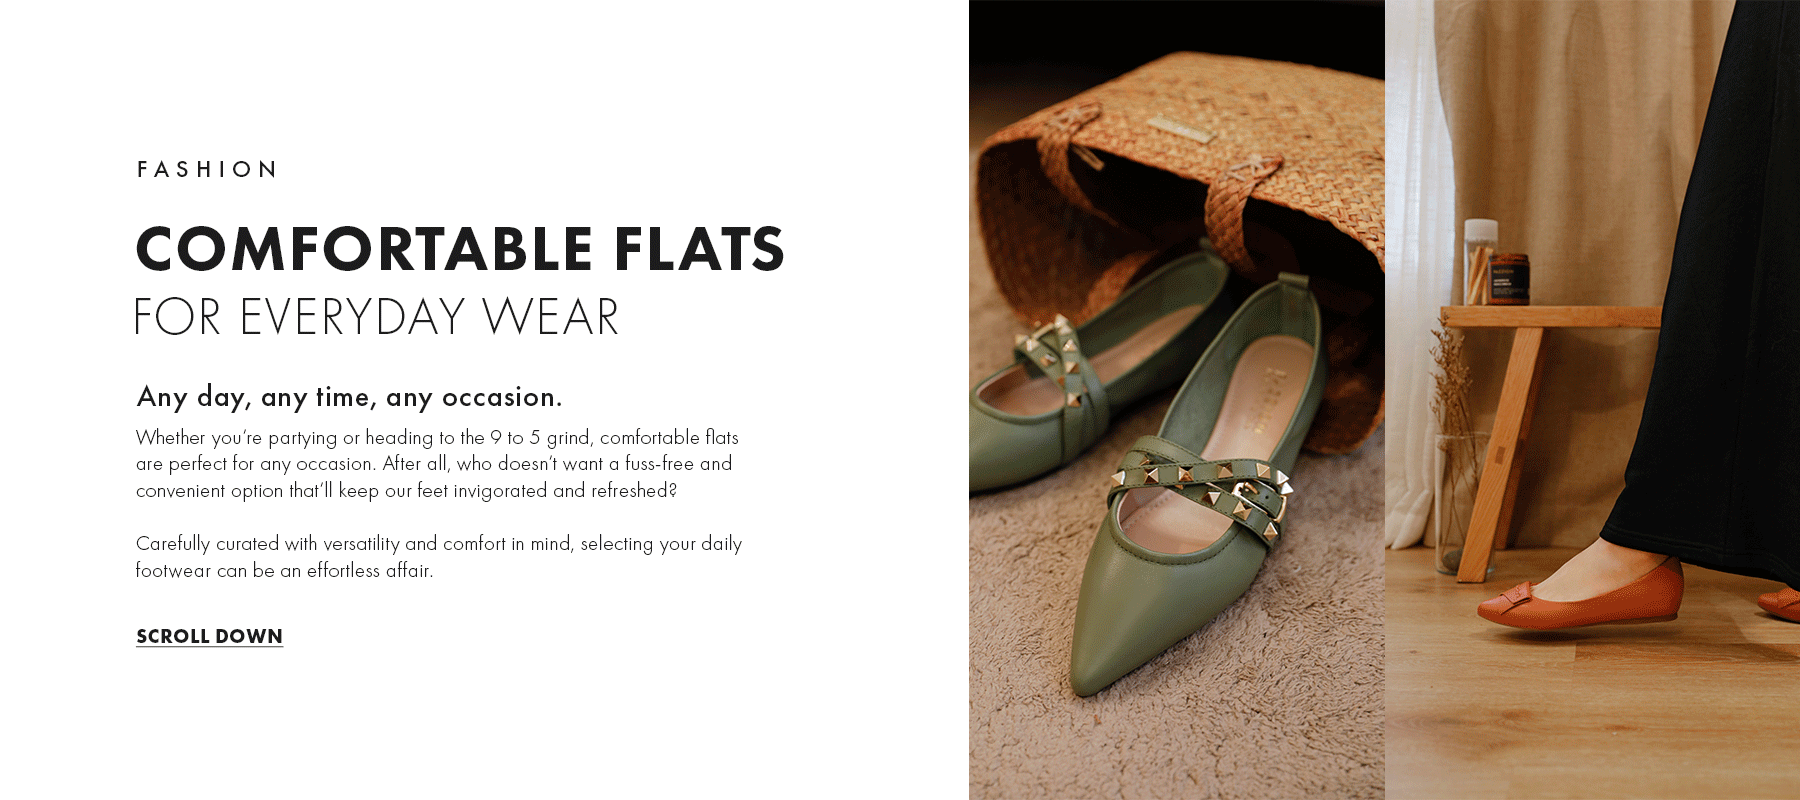 How to style dress flats for any occasion.